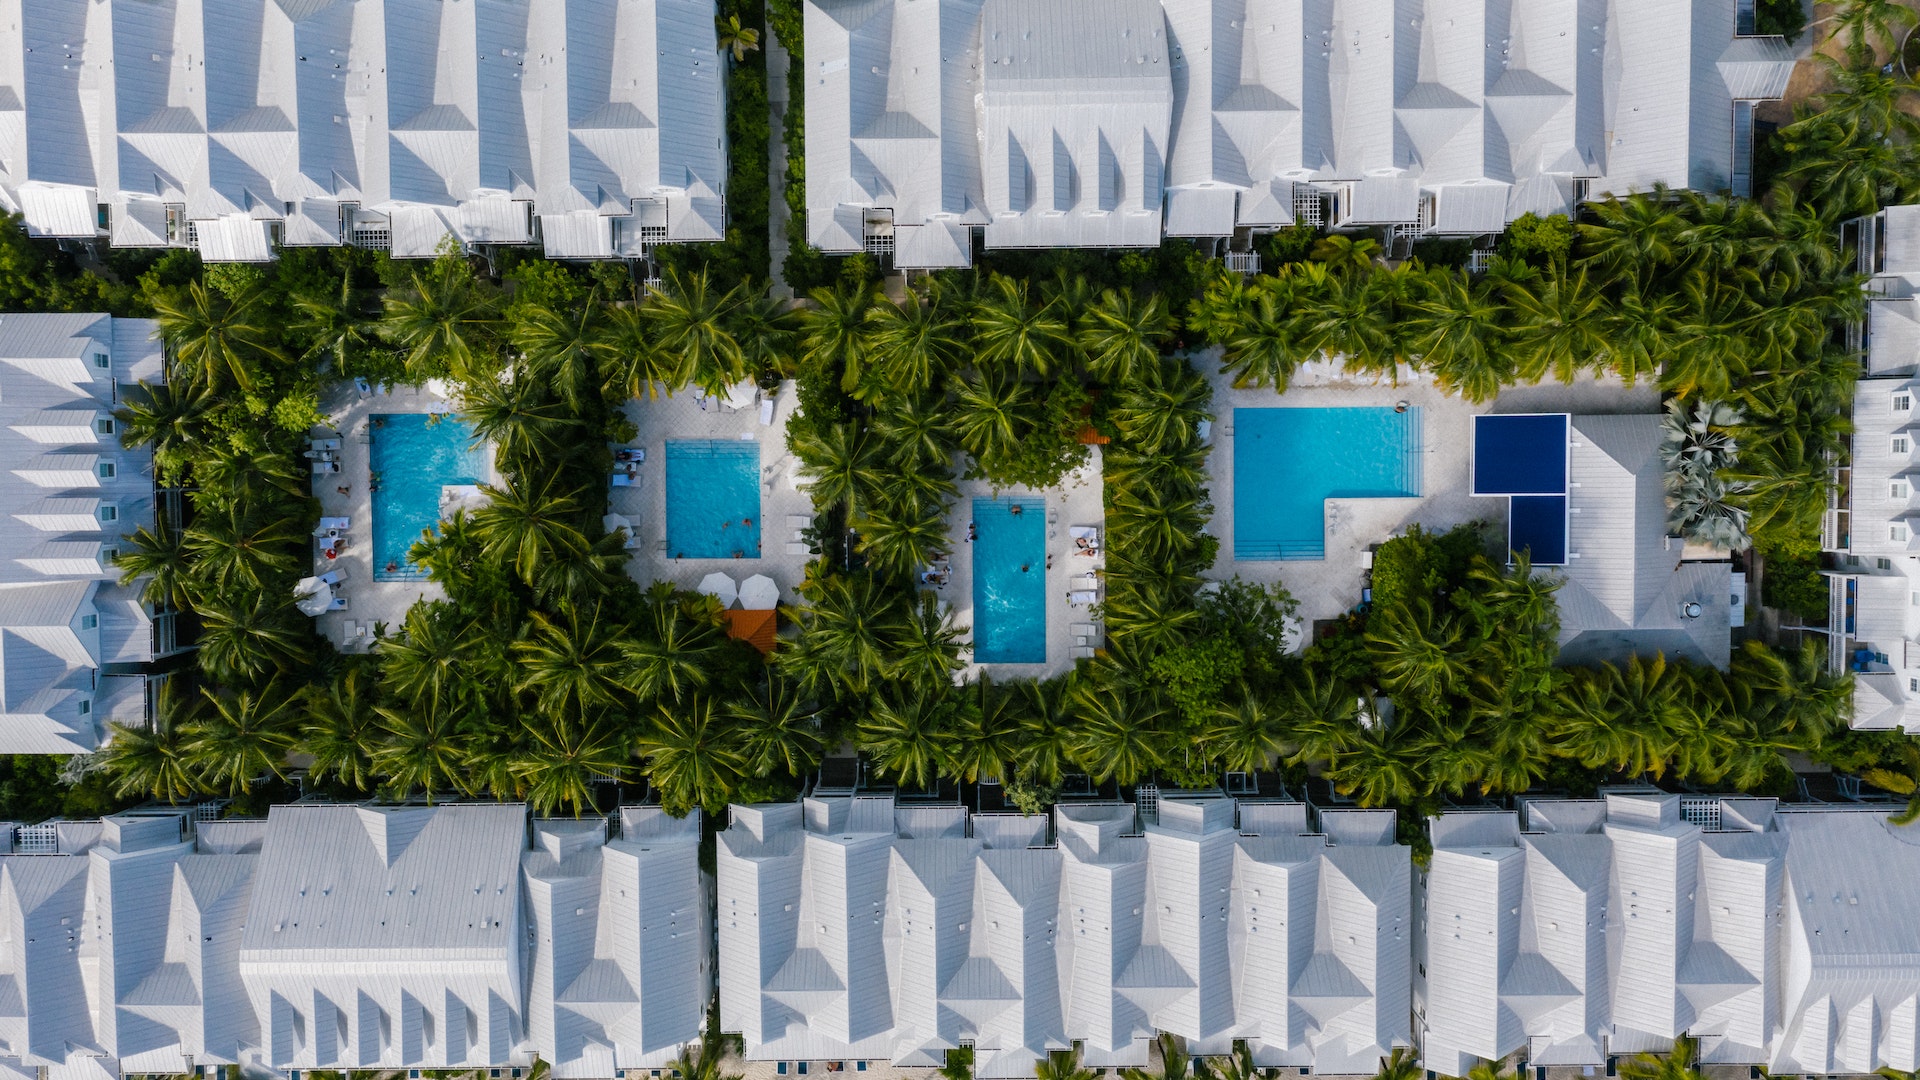 view of a hotel and apartments with swimming pools illustrating how a property can become a destination in own right with a strong brand strategy